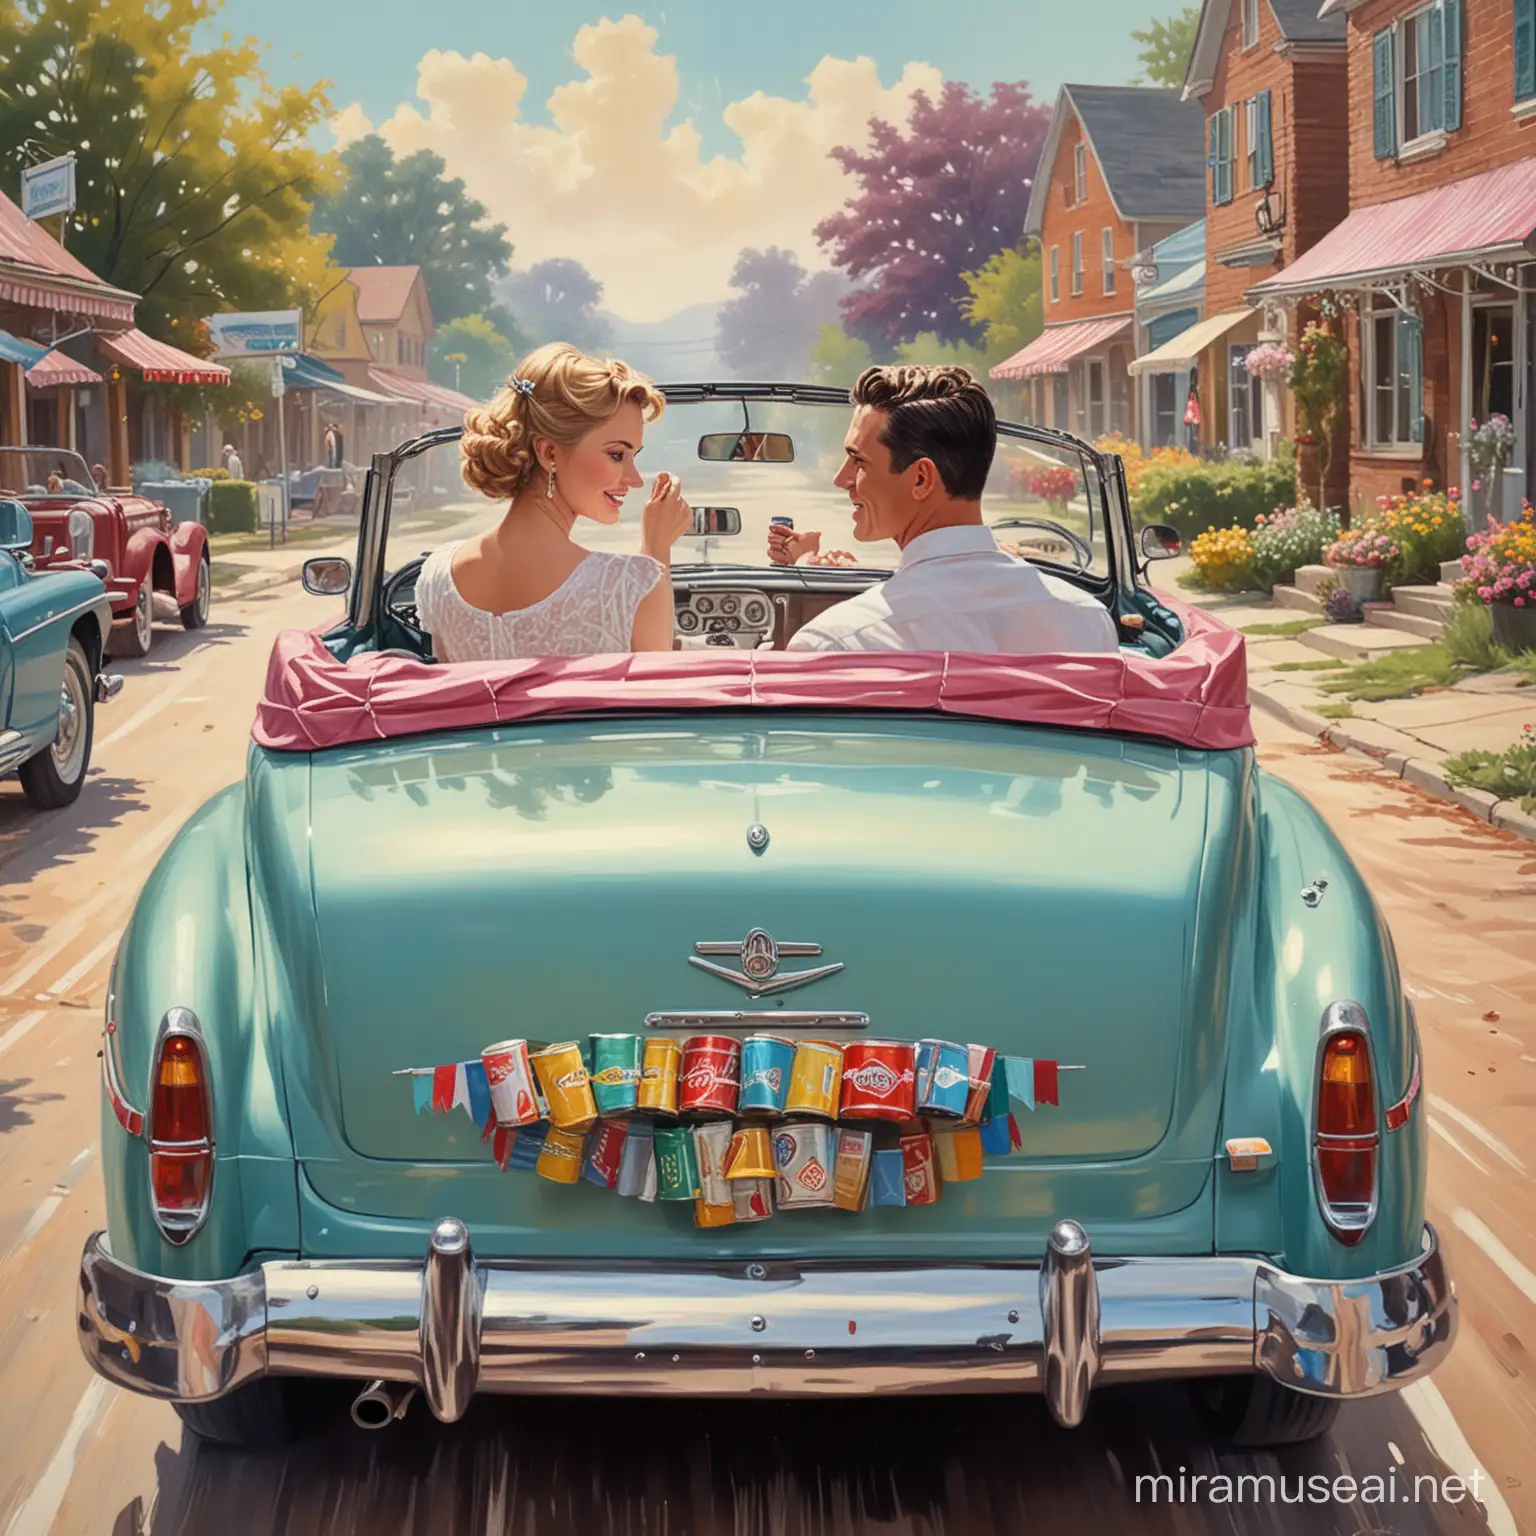 Newlyweds Driving Away in Colorful Vintage Car Just Married 50s Style